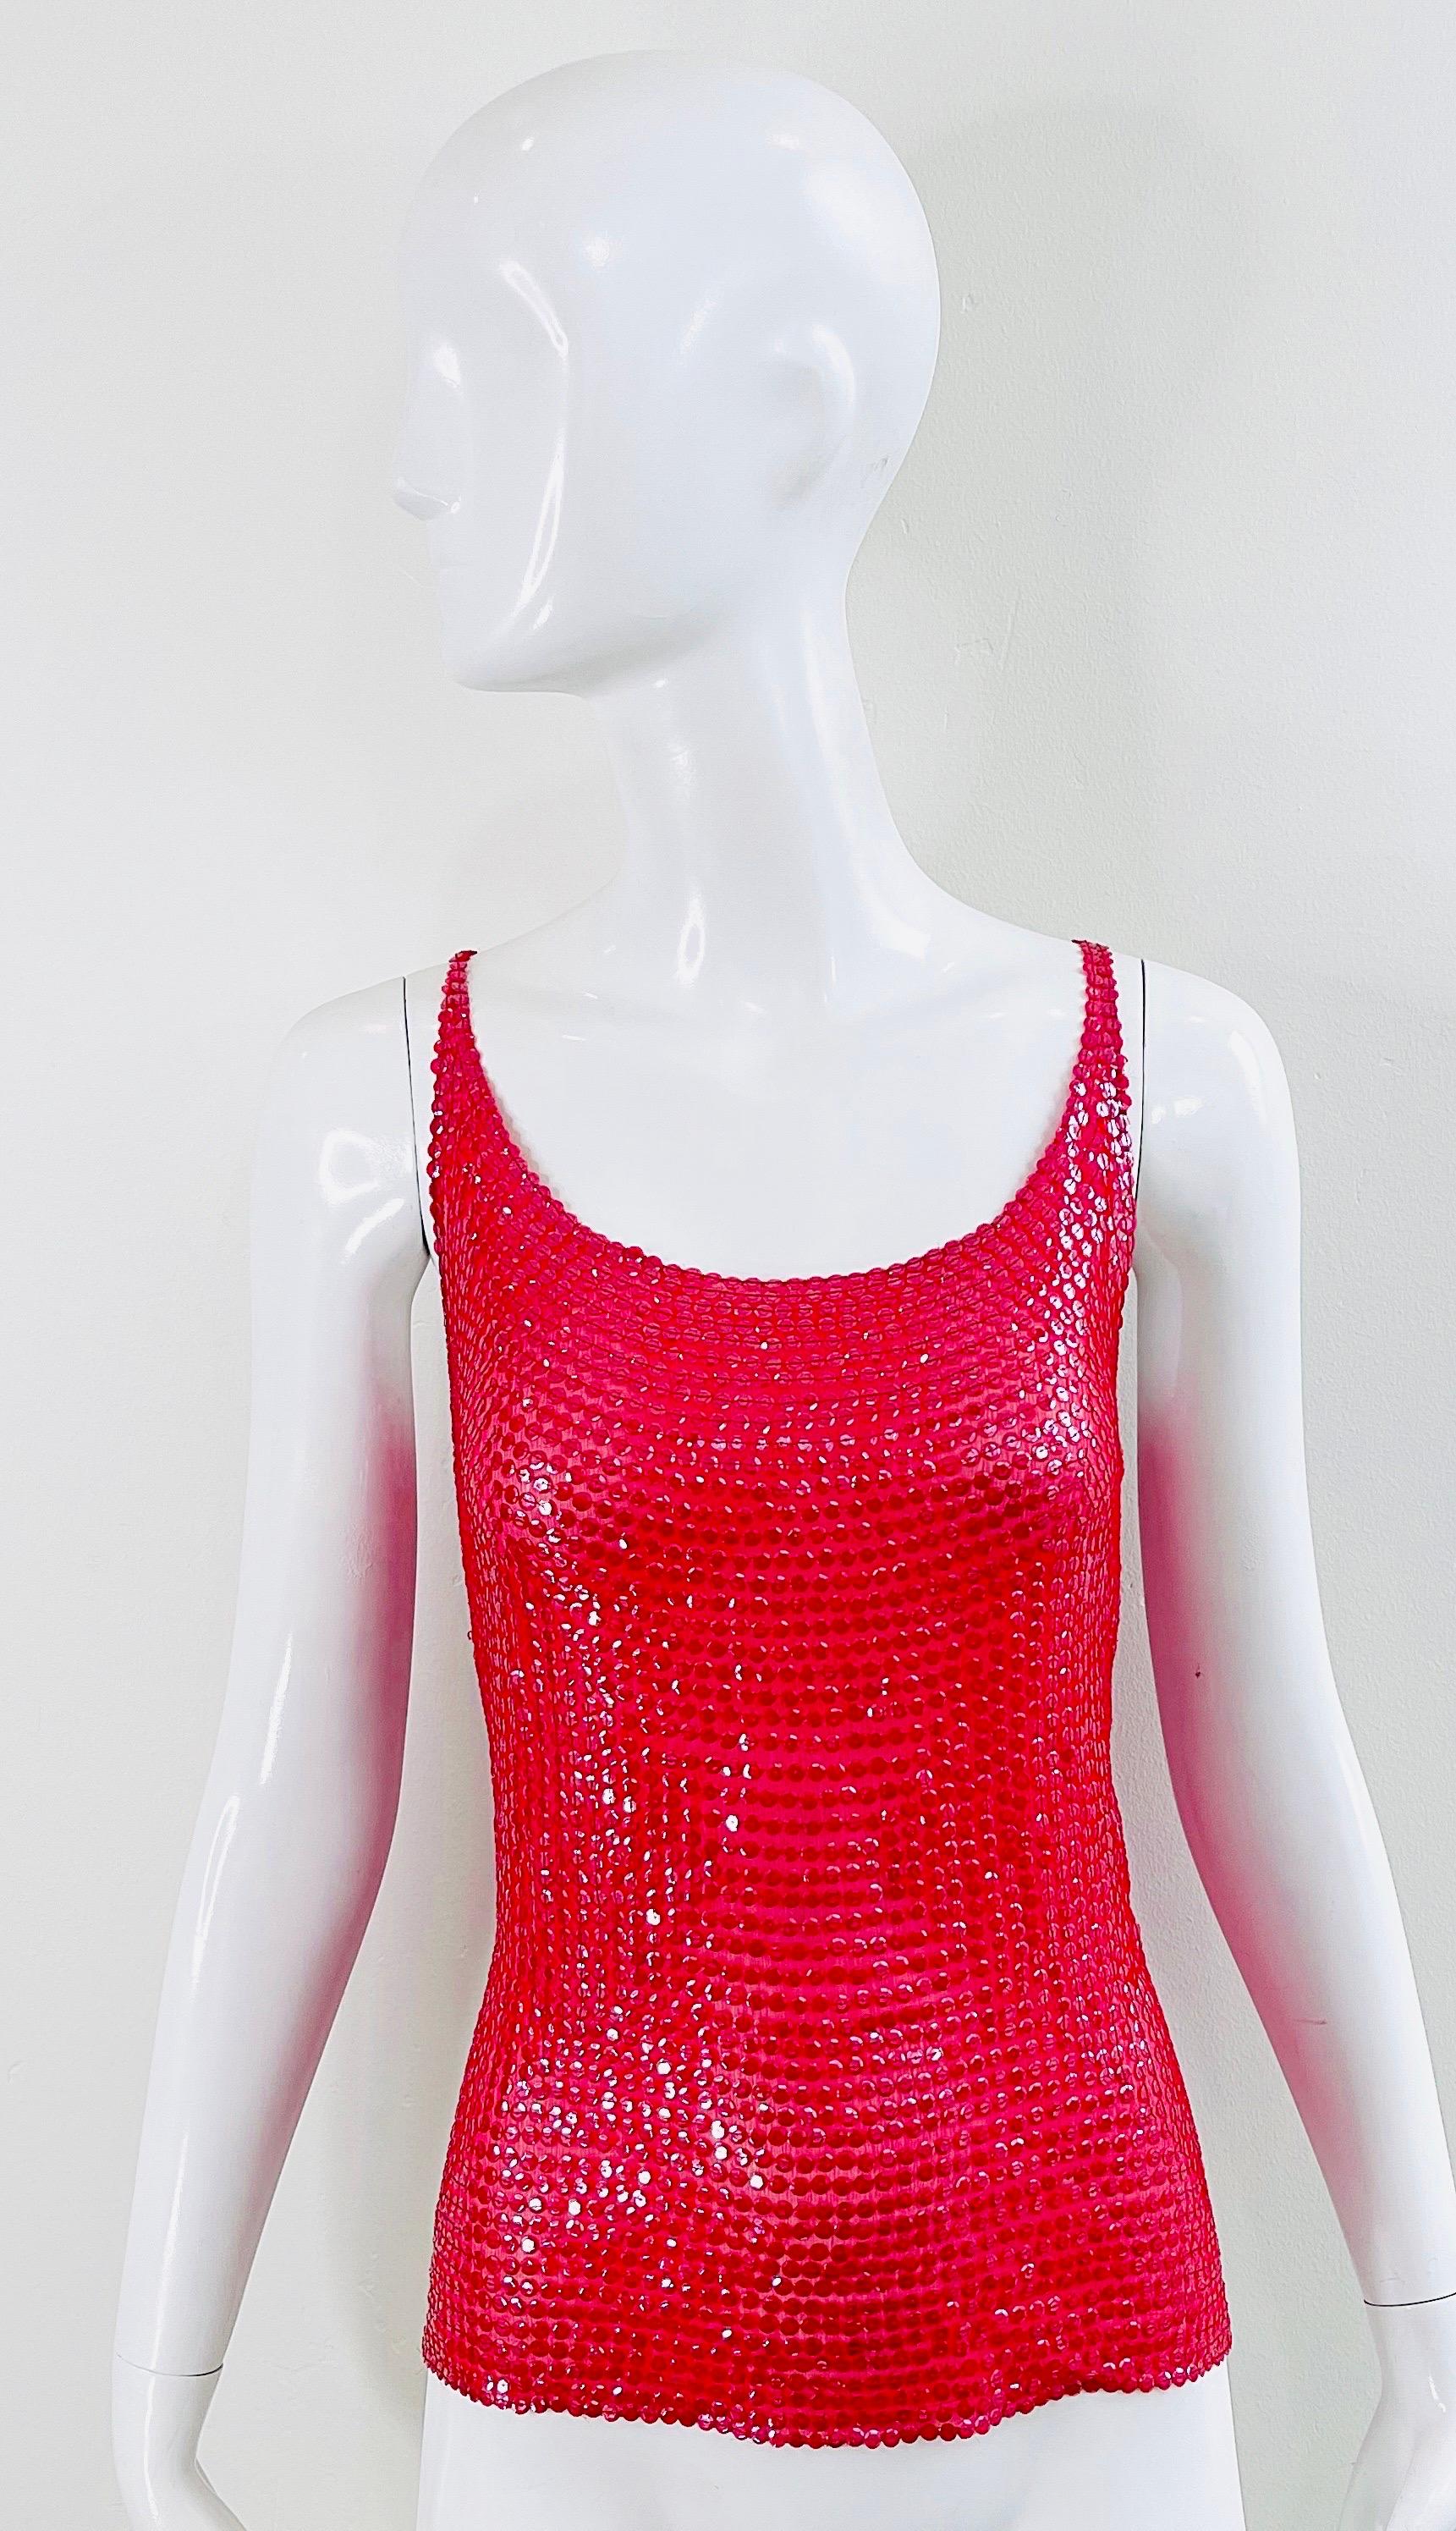 Beautiful late 1970s HALSTON lipstick / candy apple red silk chiffon sleeveless top ! This beauty comes from the Halston Sportswear line. Thousands of hand-sewn red sequins on top of a semi sheer silk chiffon. Simply slips on. Can be worn day or